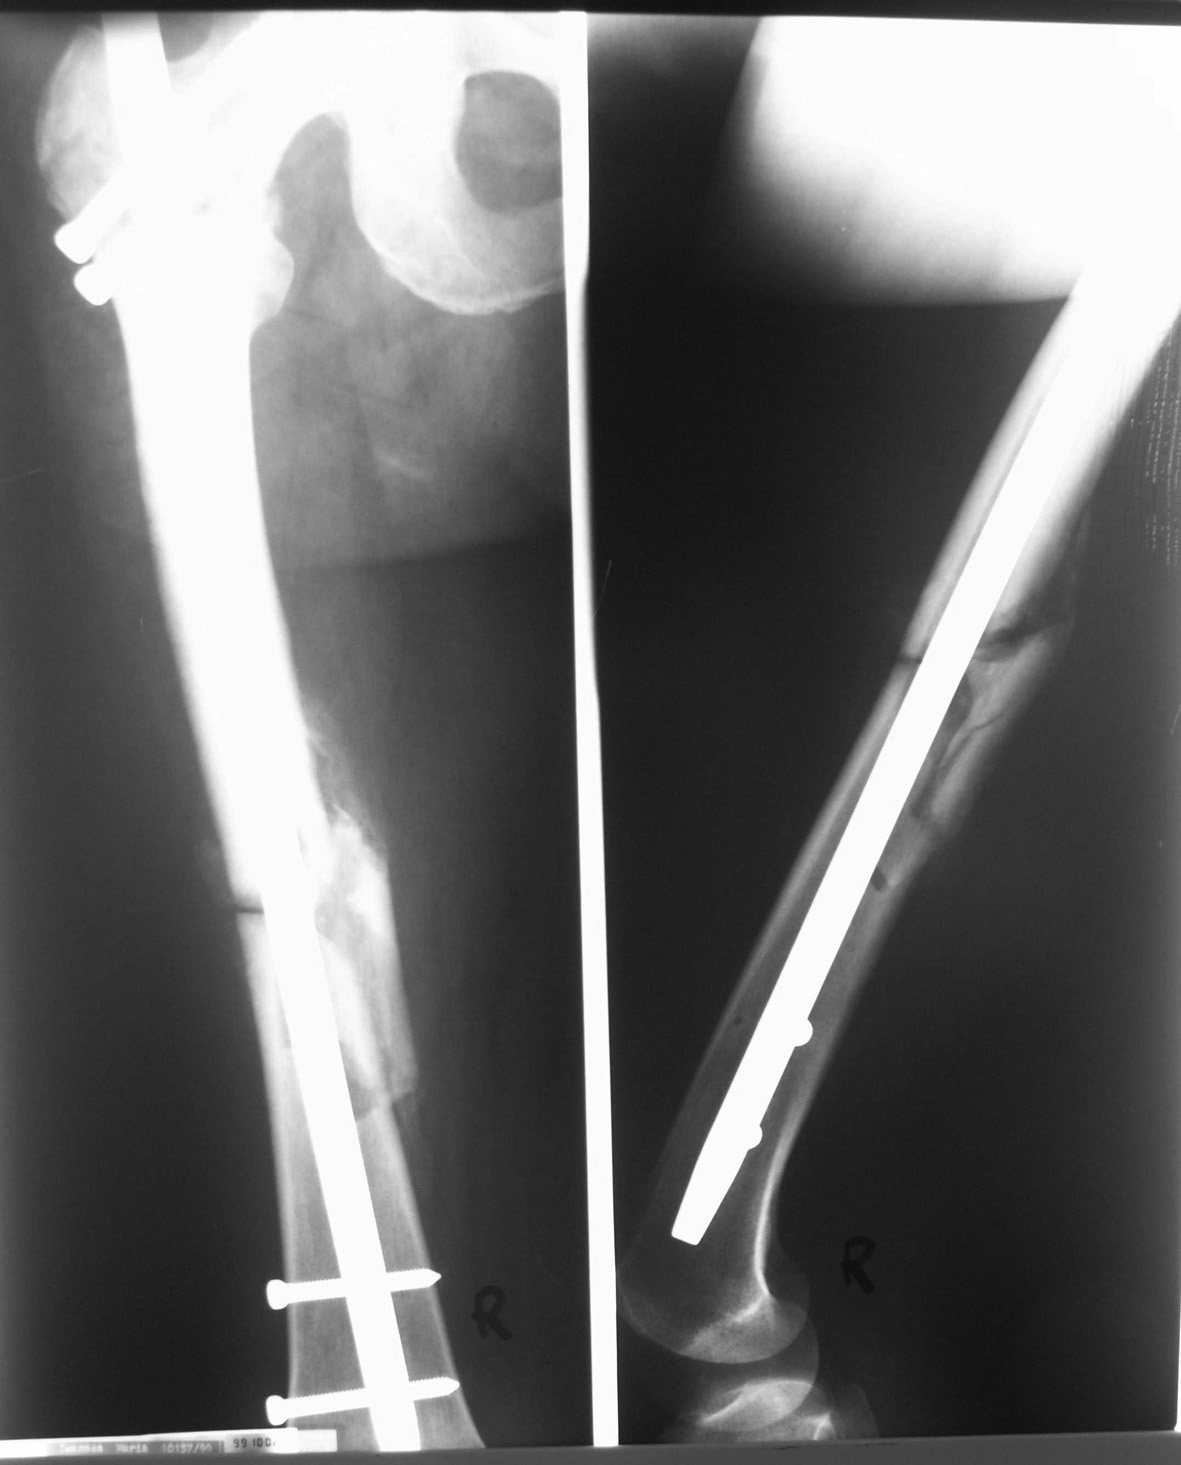 The isolated left femoral shaft fracture was stabilised using closed locked intra me - dullary nailing and the right femoral neck and shaft fracture was fixed with a reconstruction nail.